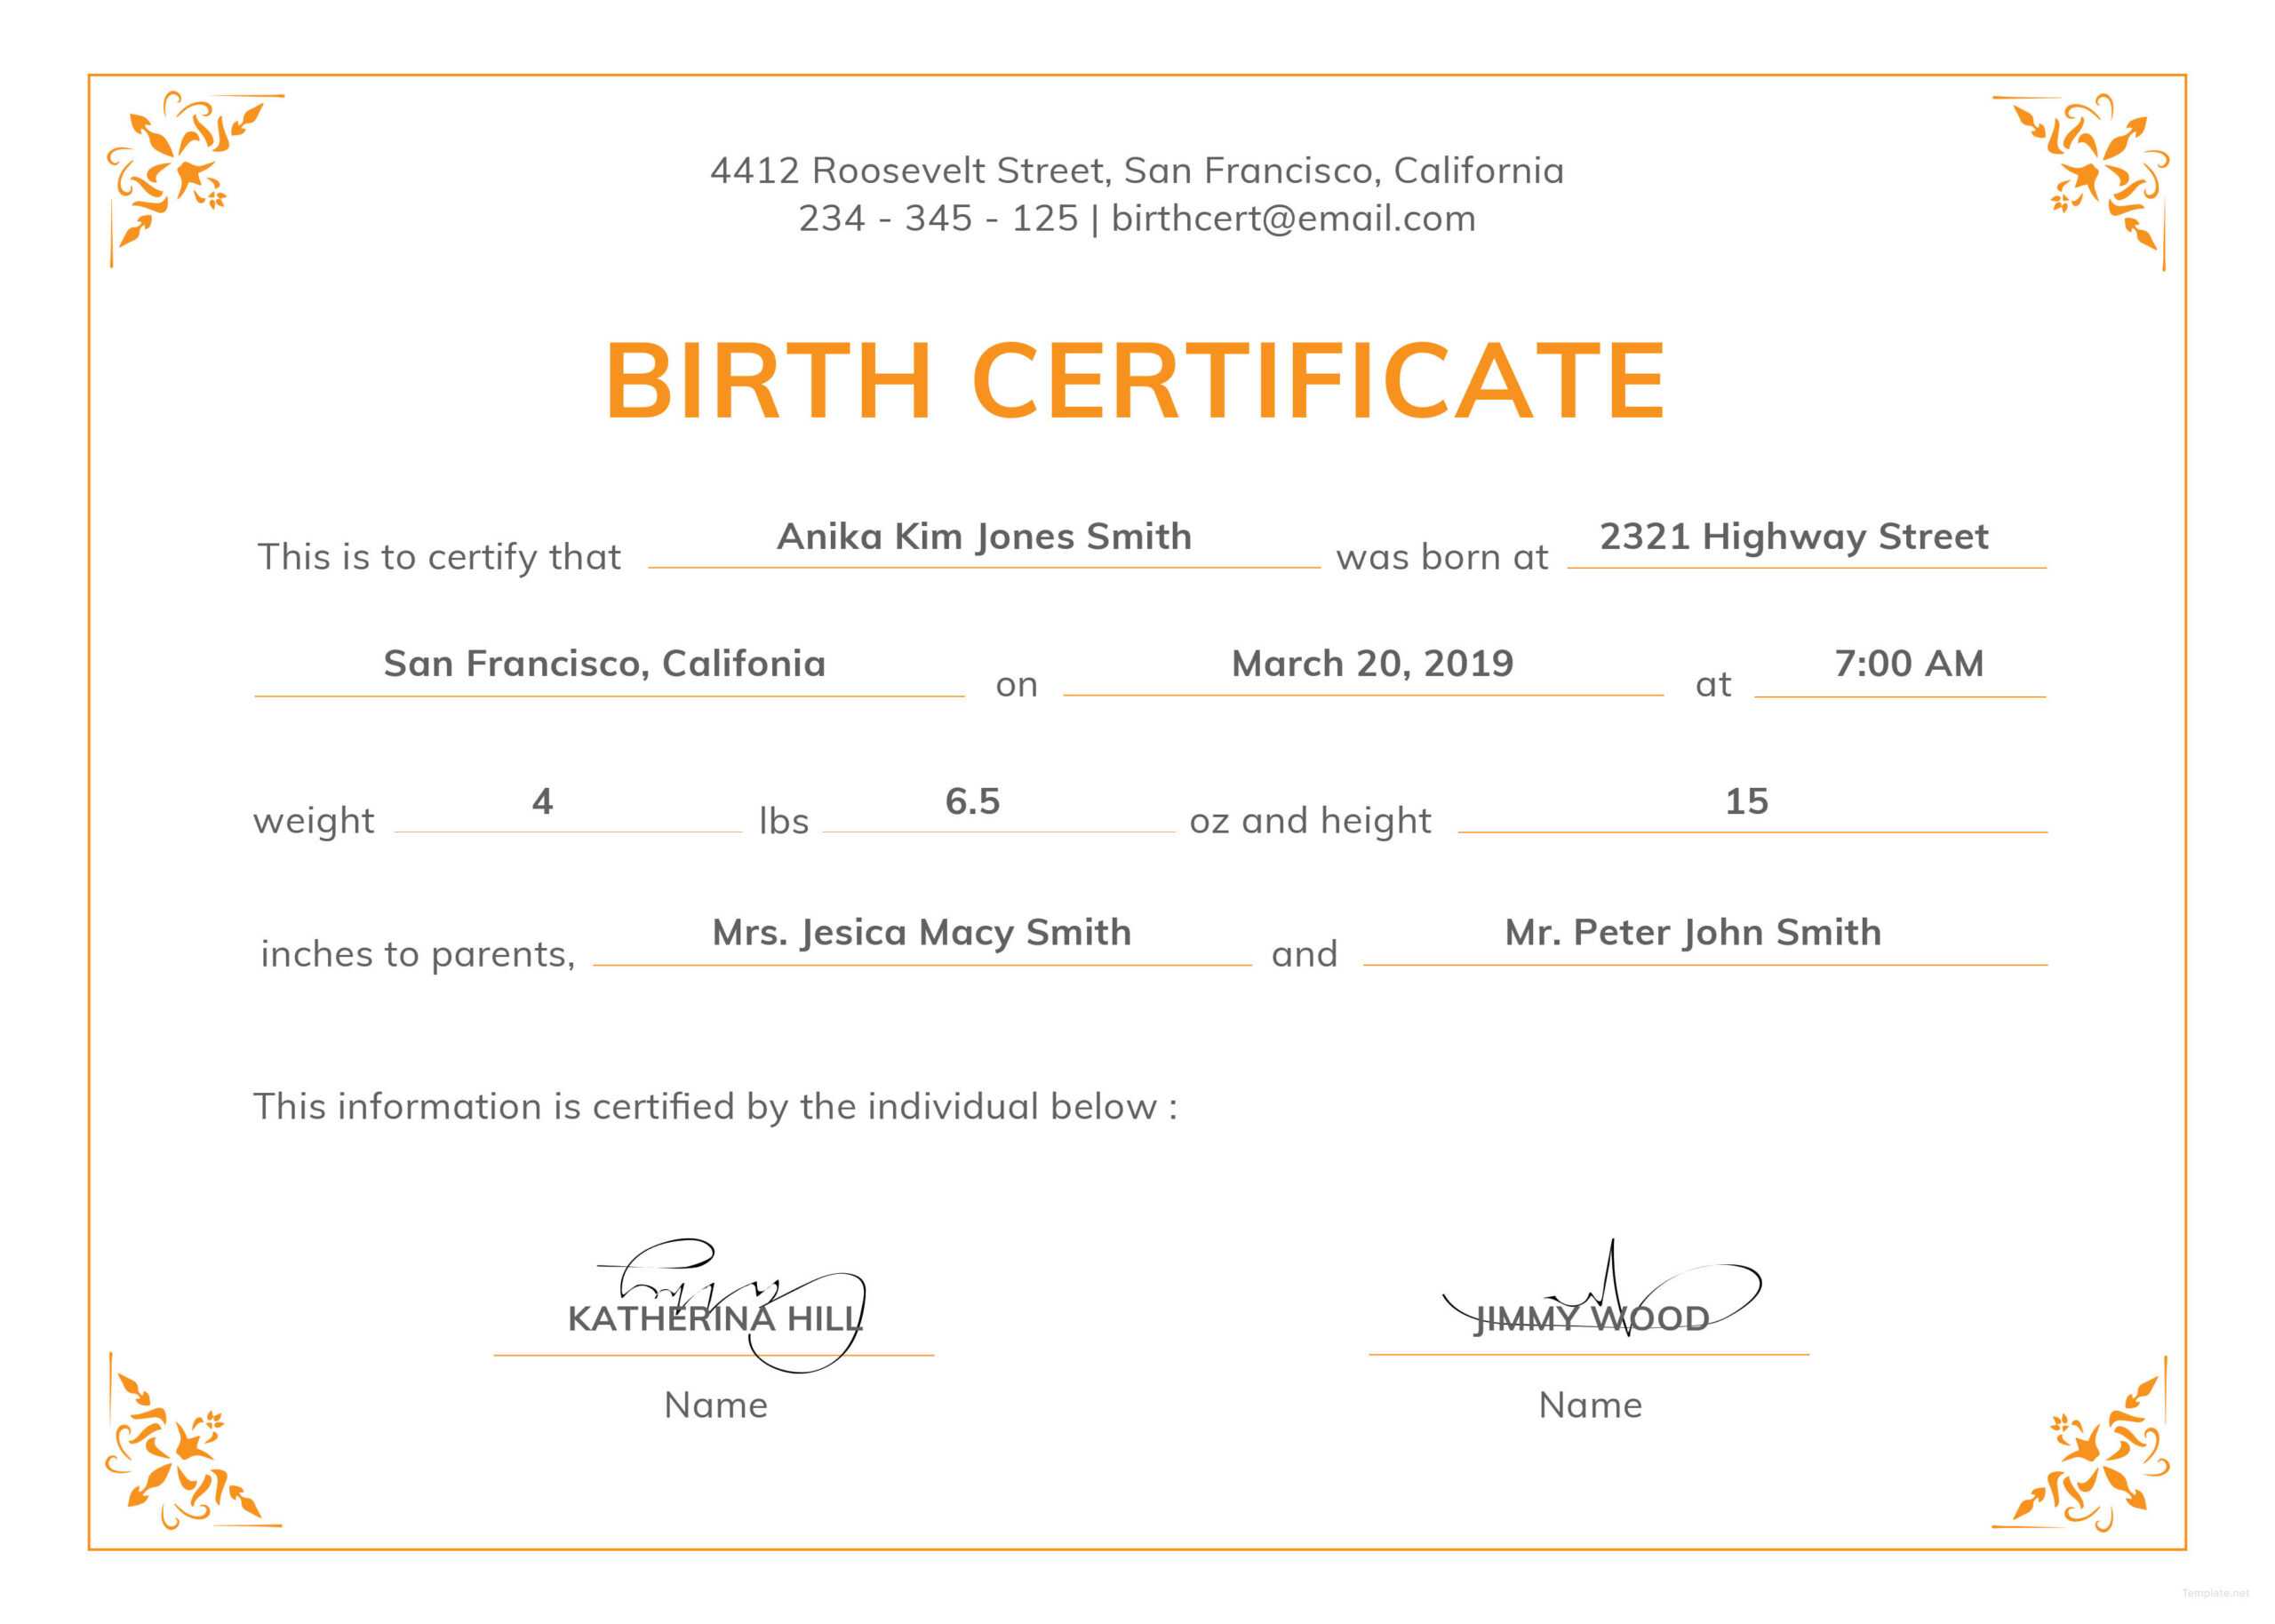 Can Make A Delivery Certificate Crucial | Gift Certificate Inside Birth Certificate Templates For Word